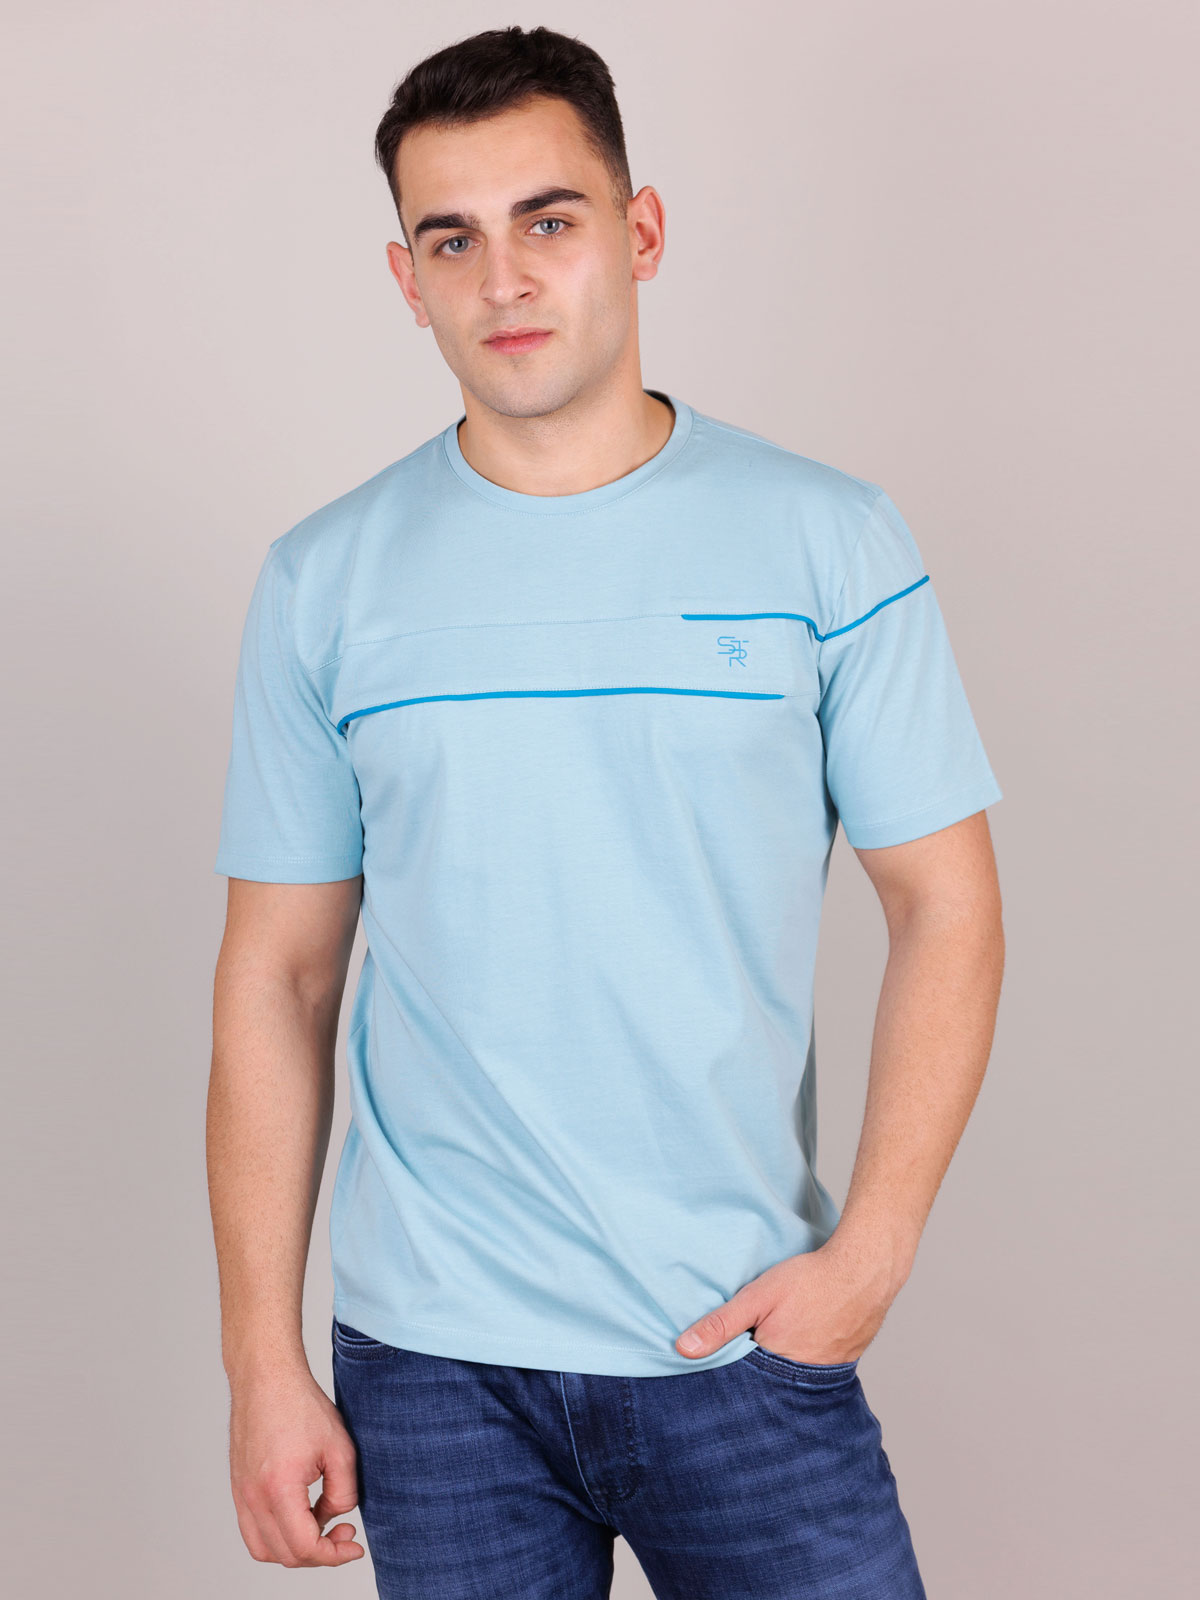 Tshirt in light blue with logo - 96454 € 21.93 img4